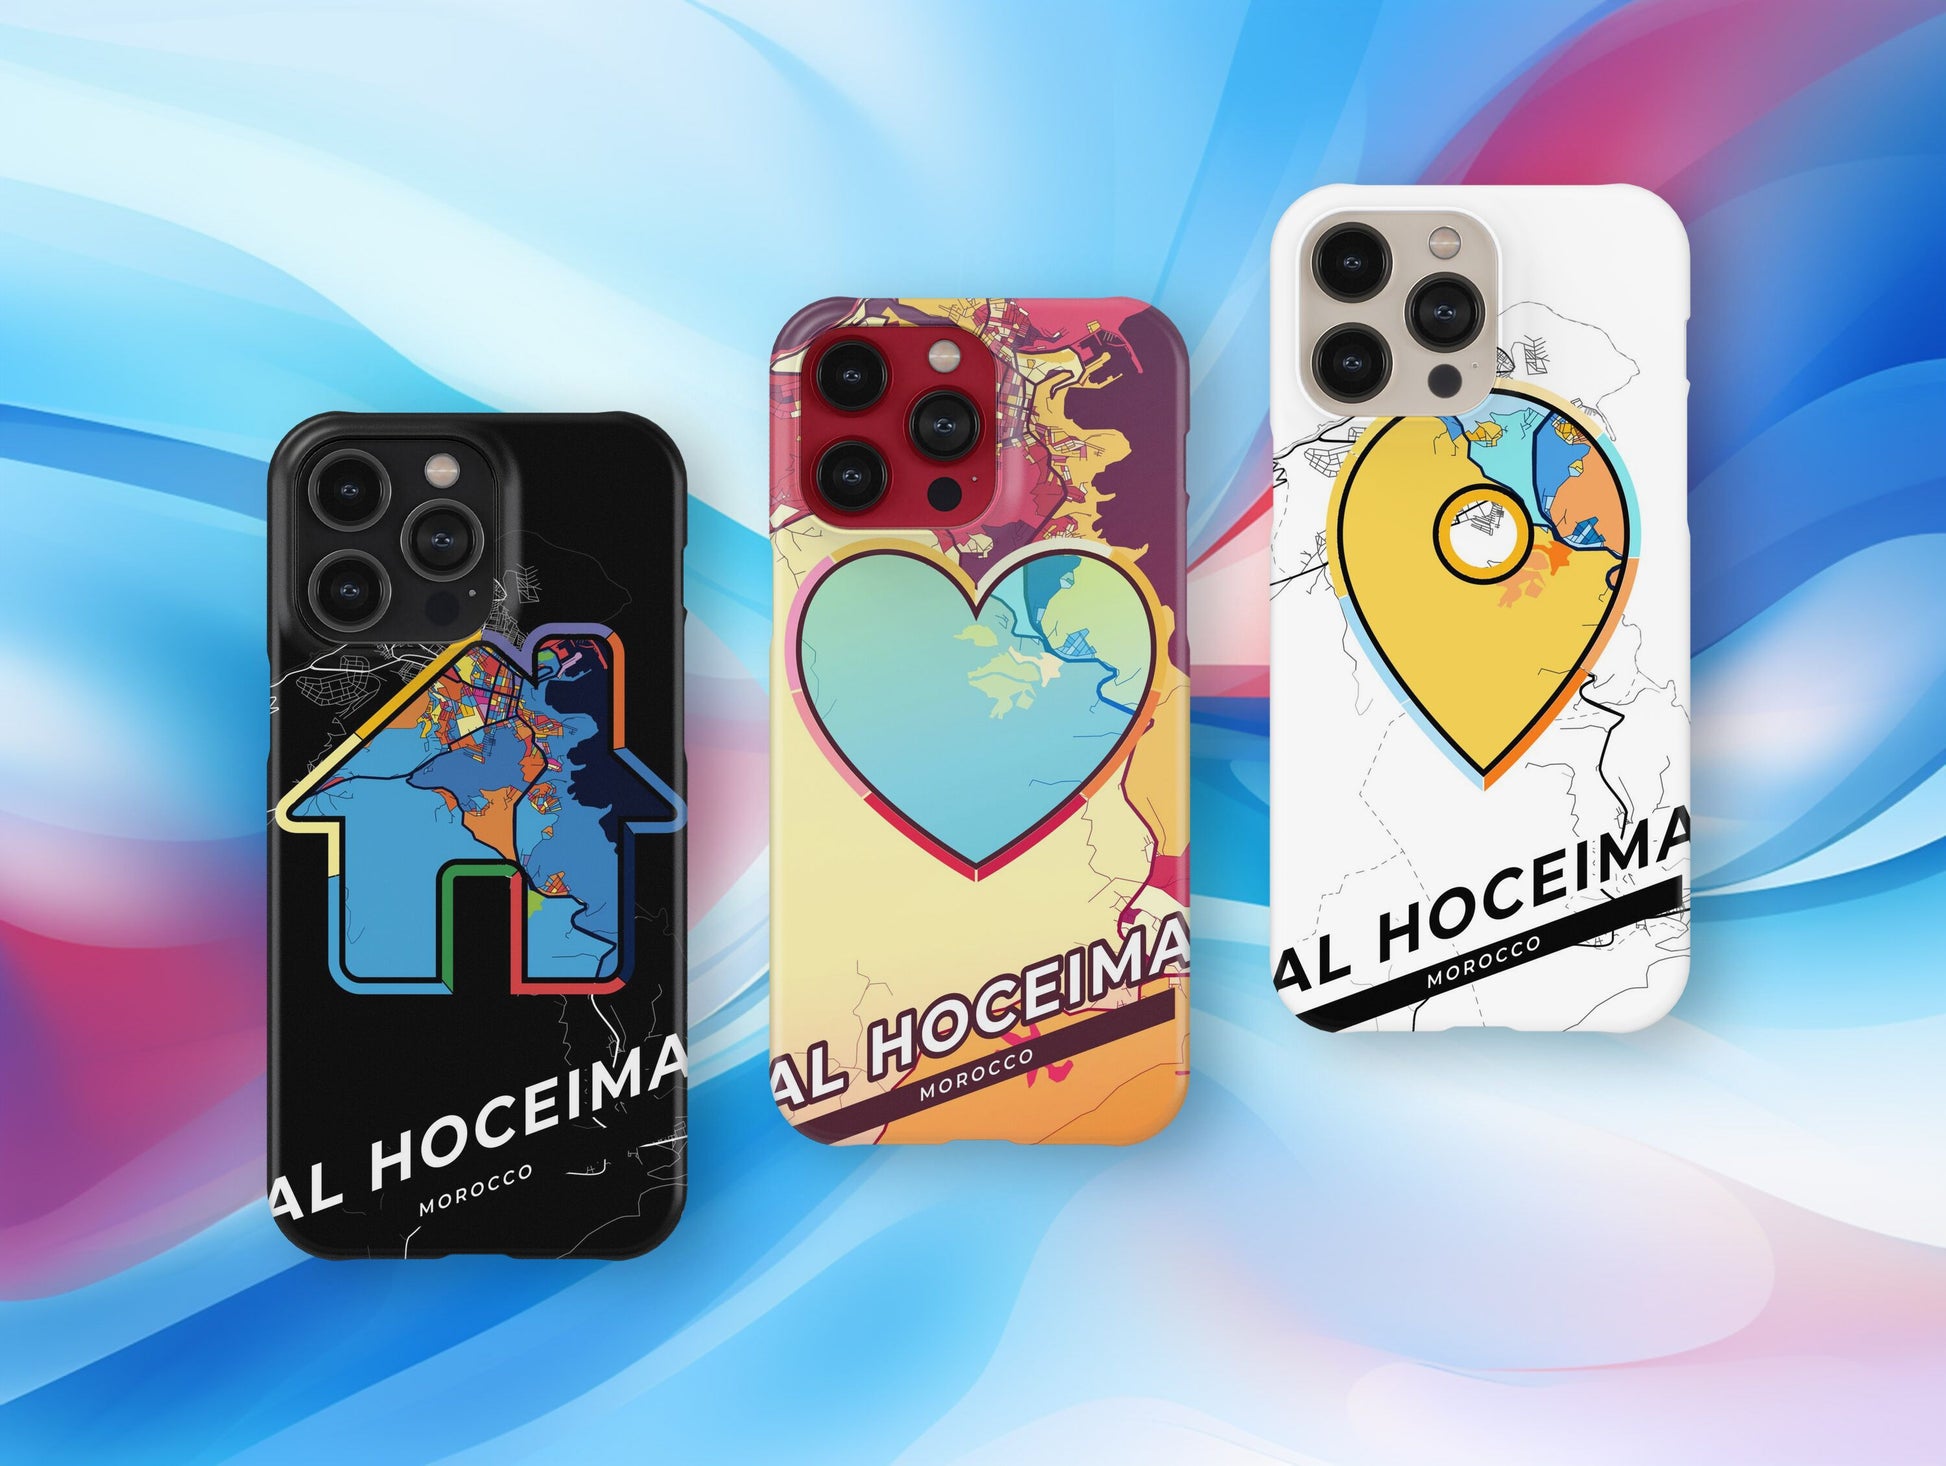 Al Hoceima Morocco slim phone case with colorful icon. Birthday, wedding or housewarming gift. Couple match cases.